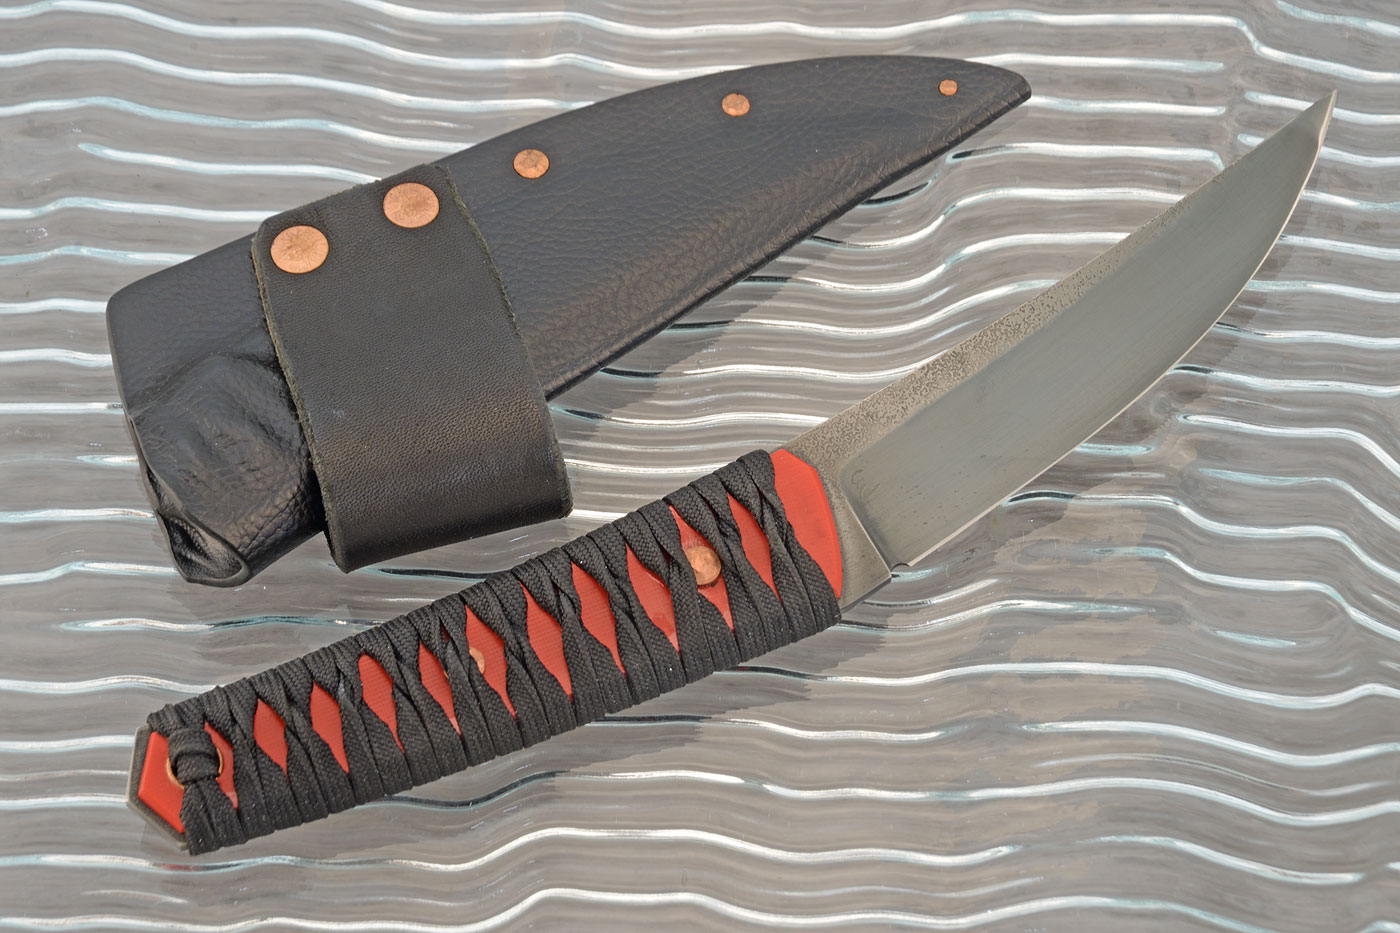 Forged Armor Piercing Kwaiken with Red G-10